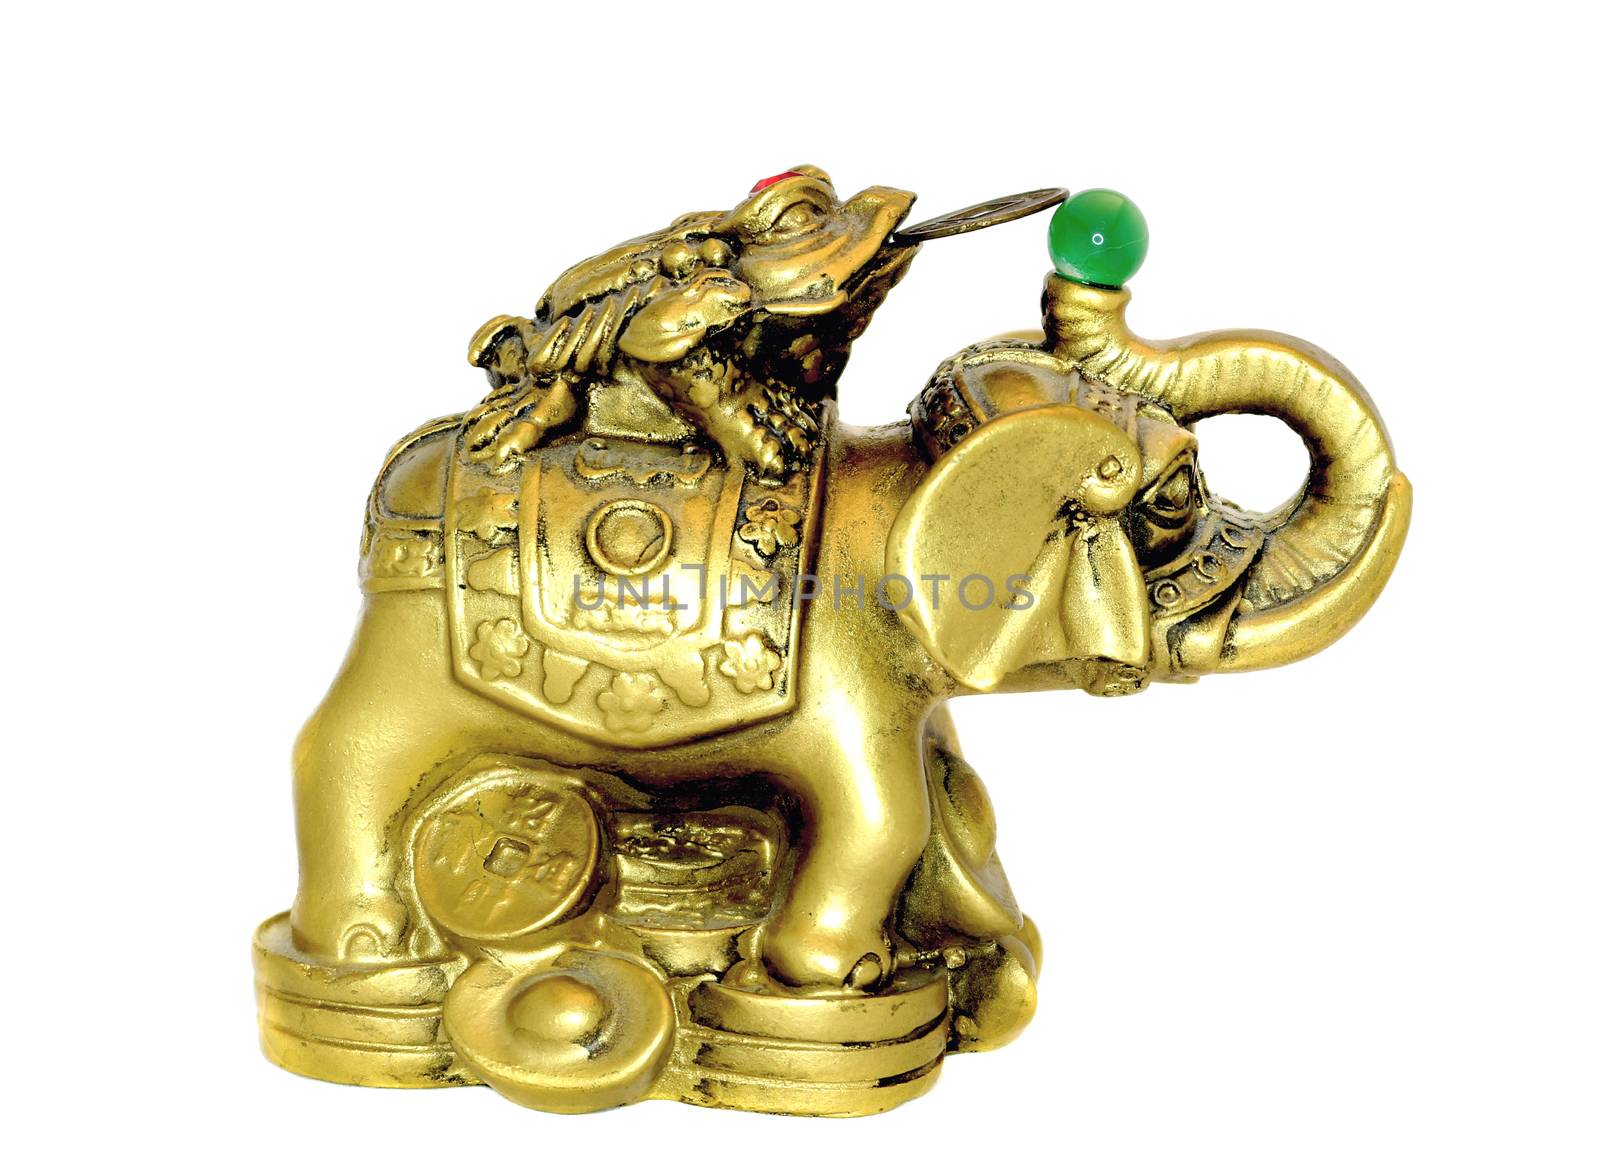 Elephant and Money Toad Gold Figure on a white Background